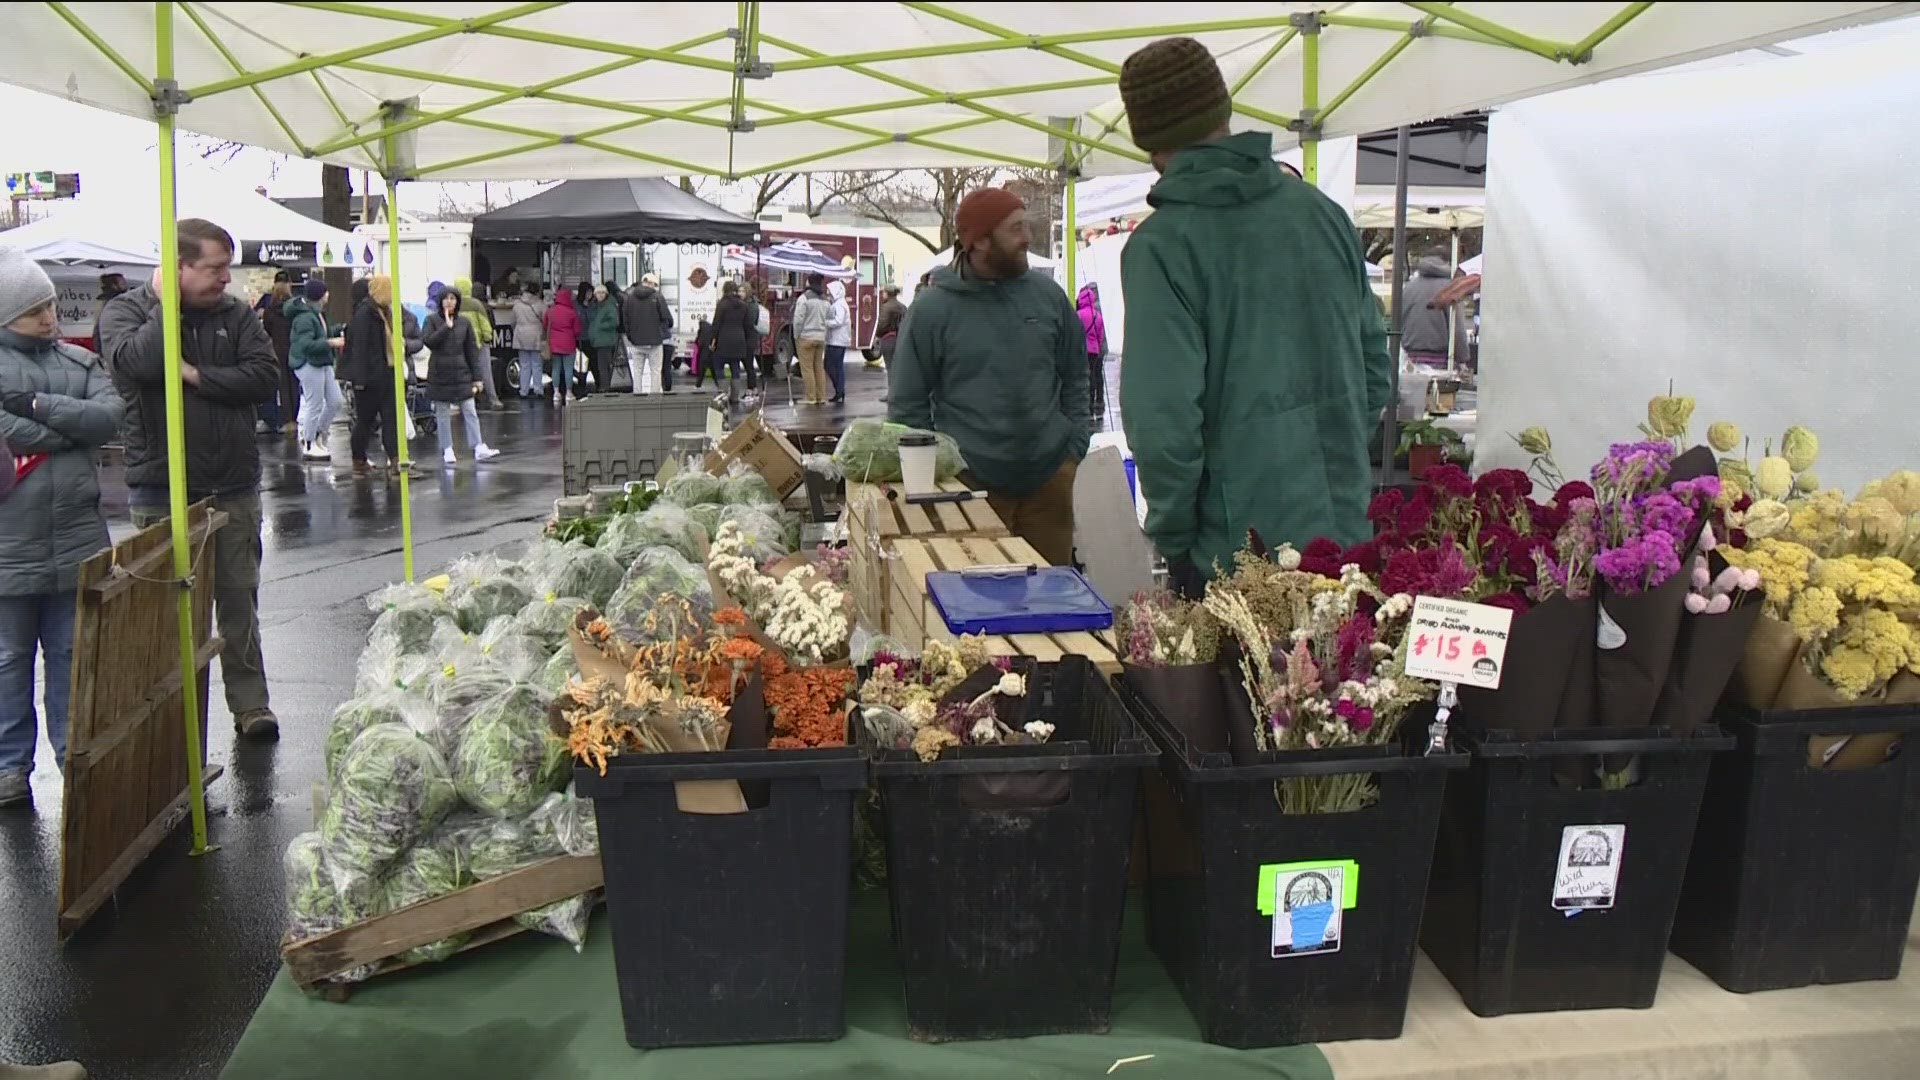 Don't let the wet weather stop you from celebrating opening day with the Boise Farmers Market and Nampa Farmers Market on Saturday, April 6.